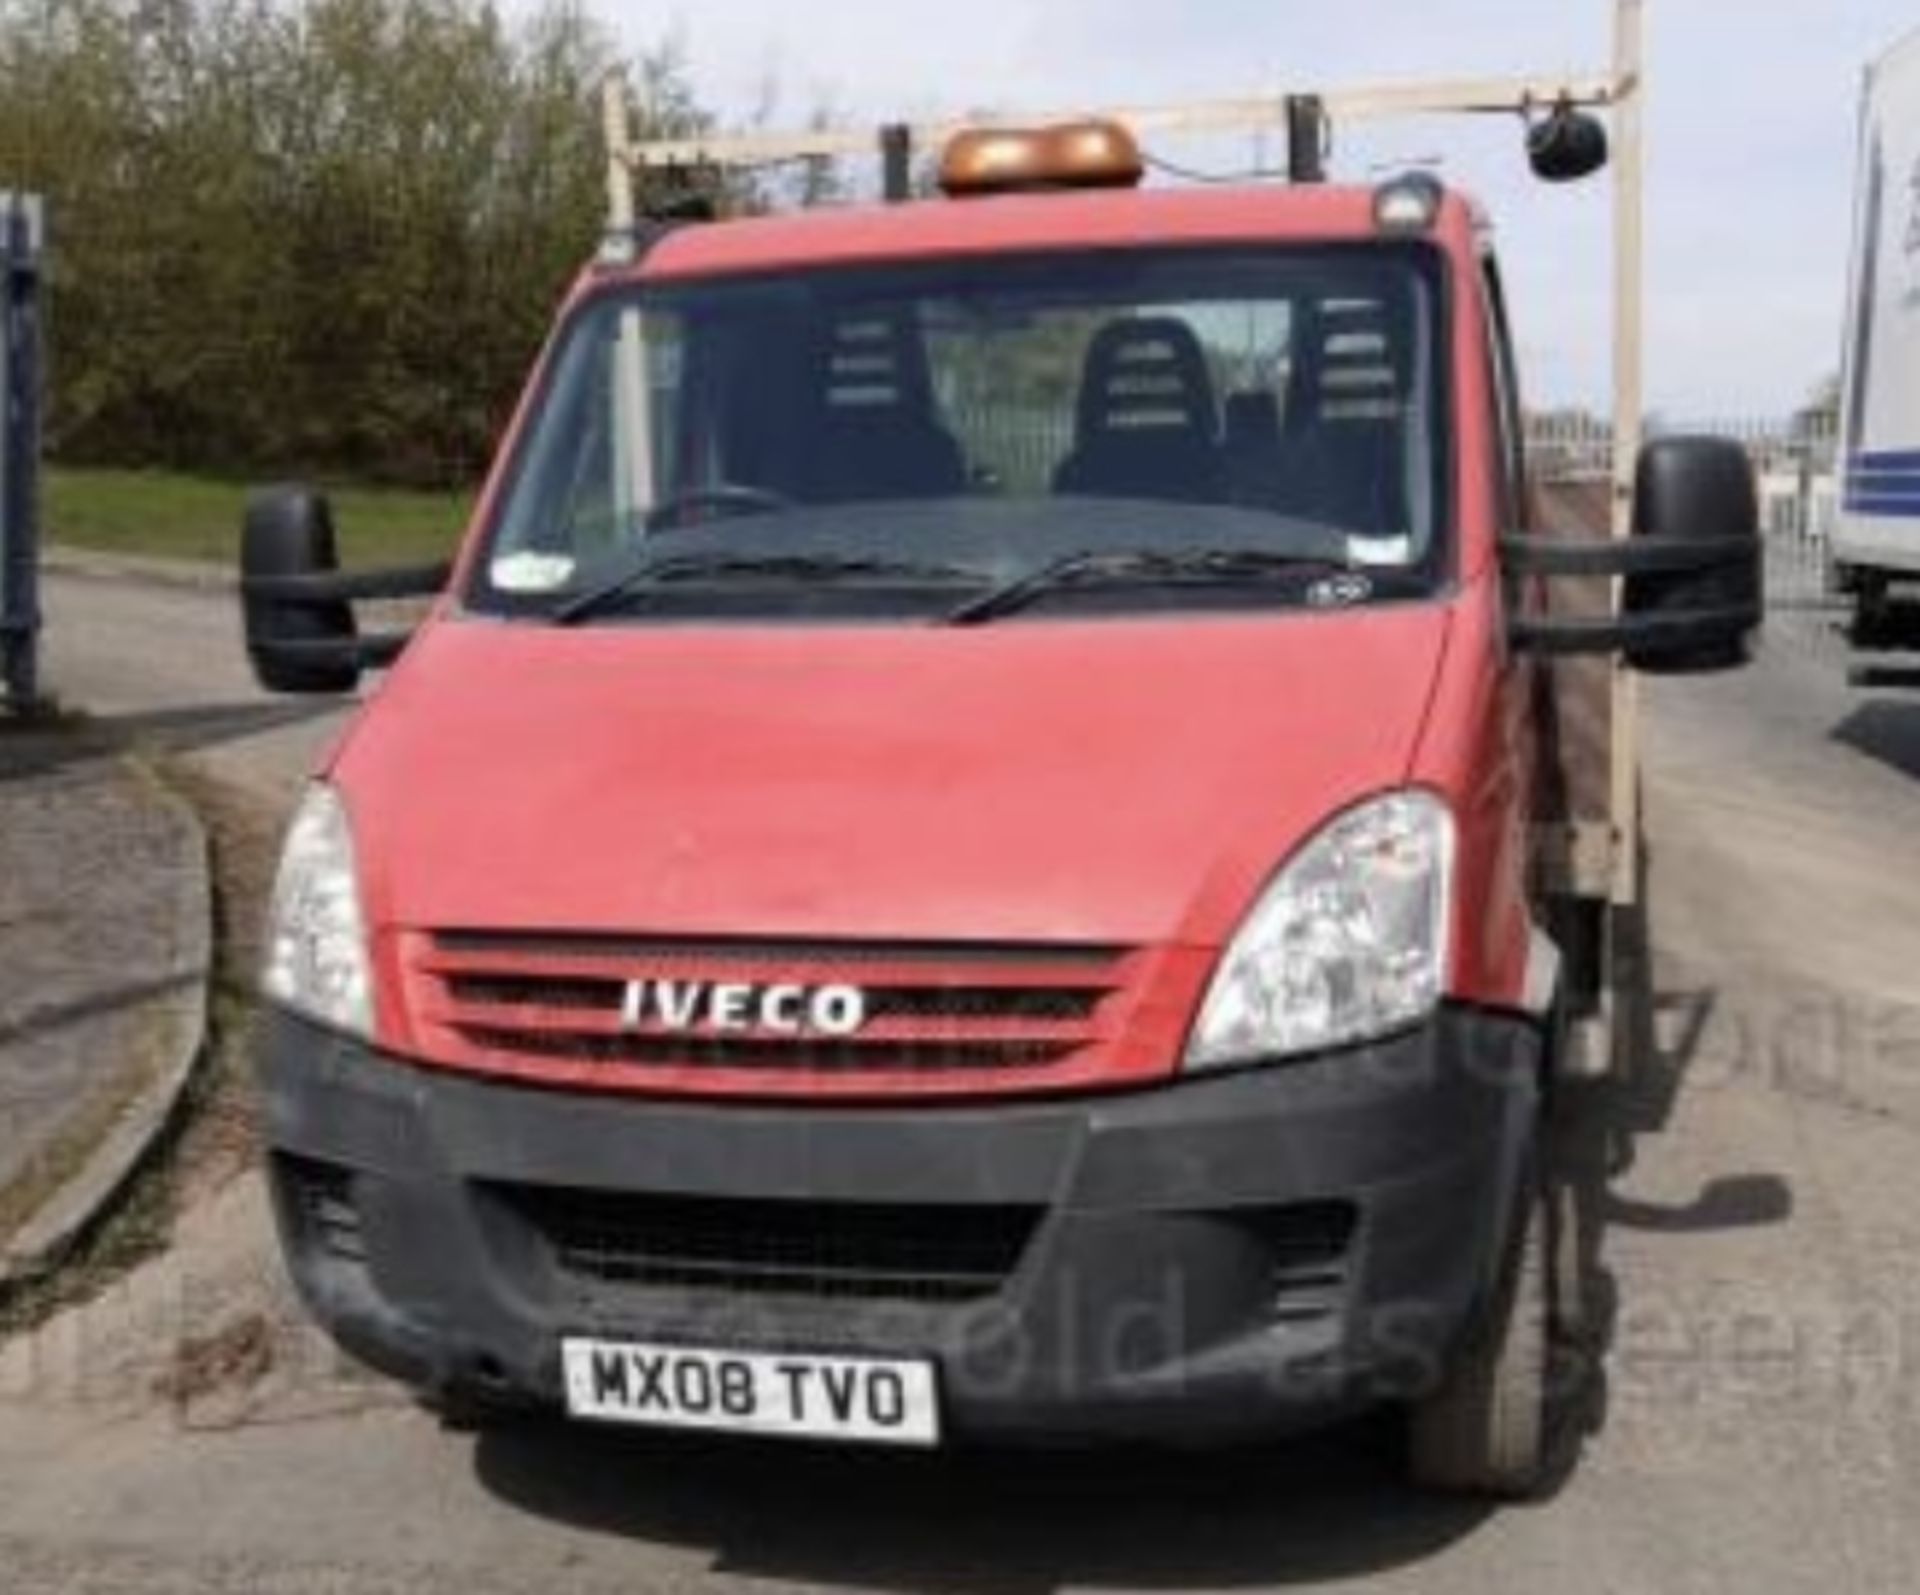 2008 IVECO DAILY 65C18 8M FLAT BED PICK UP TRUCK 12 MONTH MOT*LOCATION NORTH YORKSHIRE* - Image 4 of 5